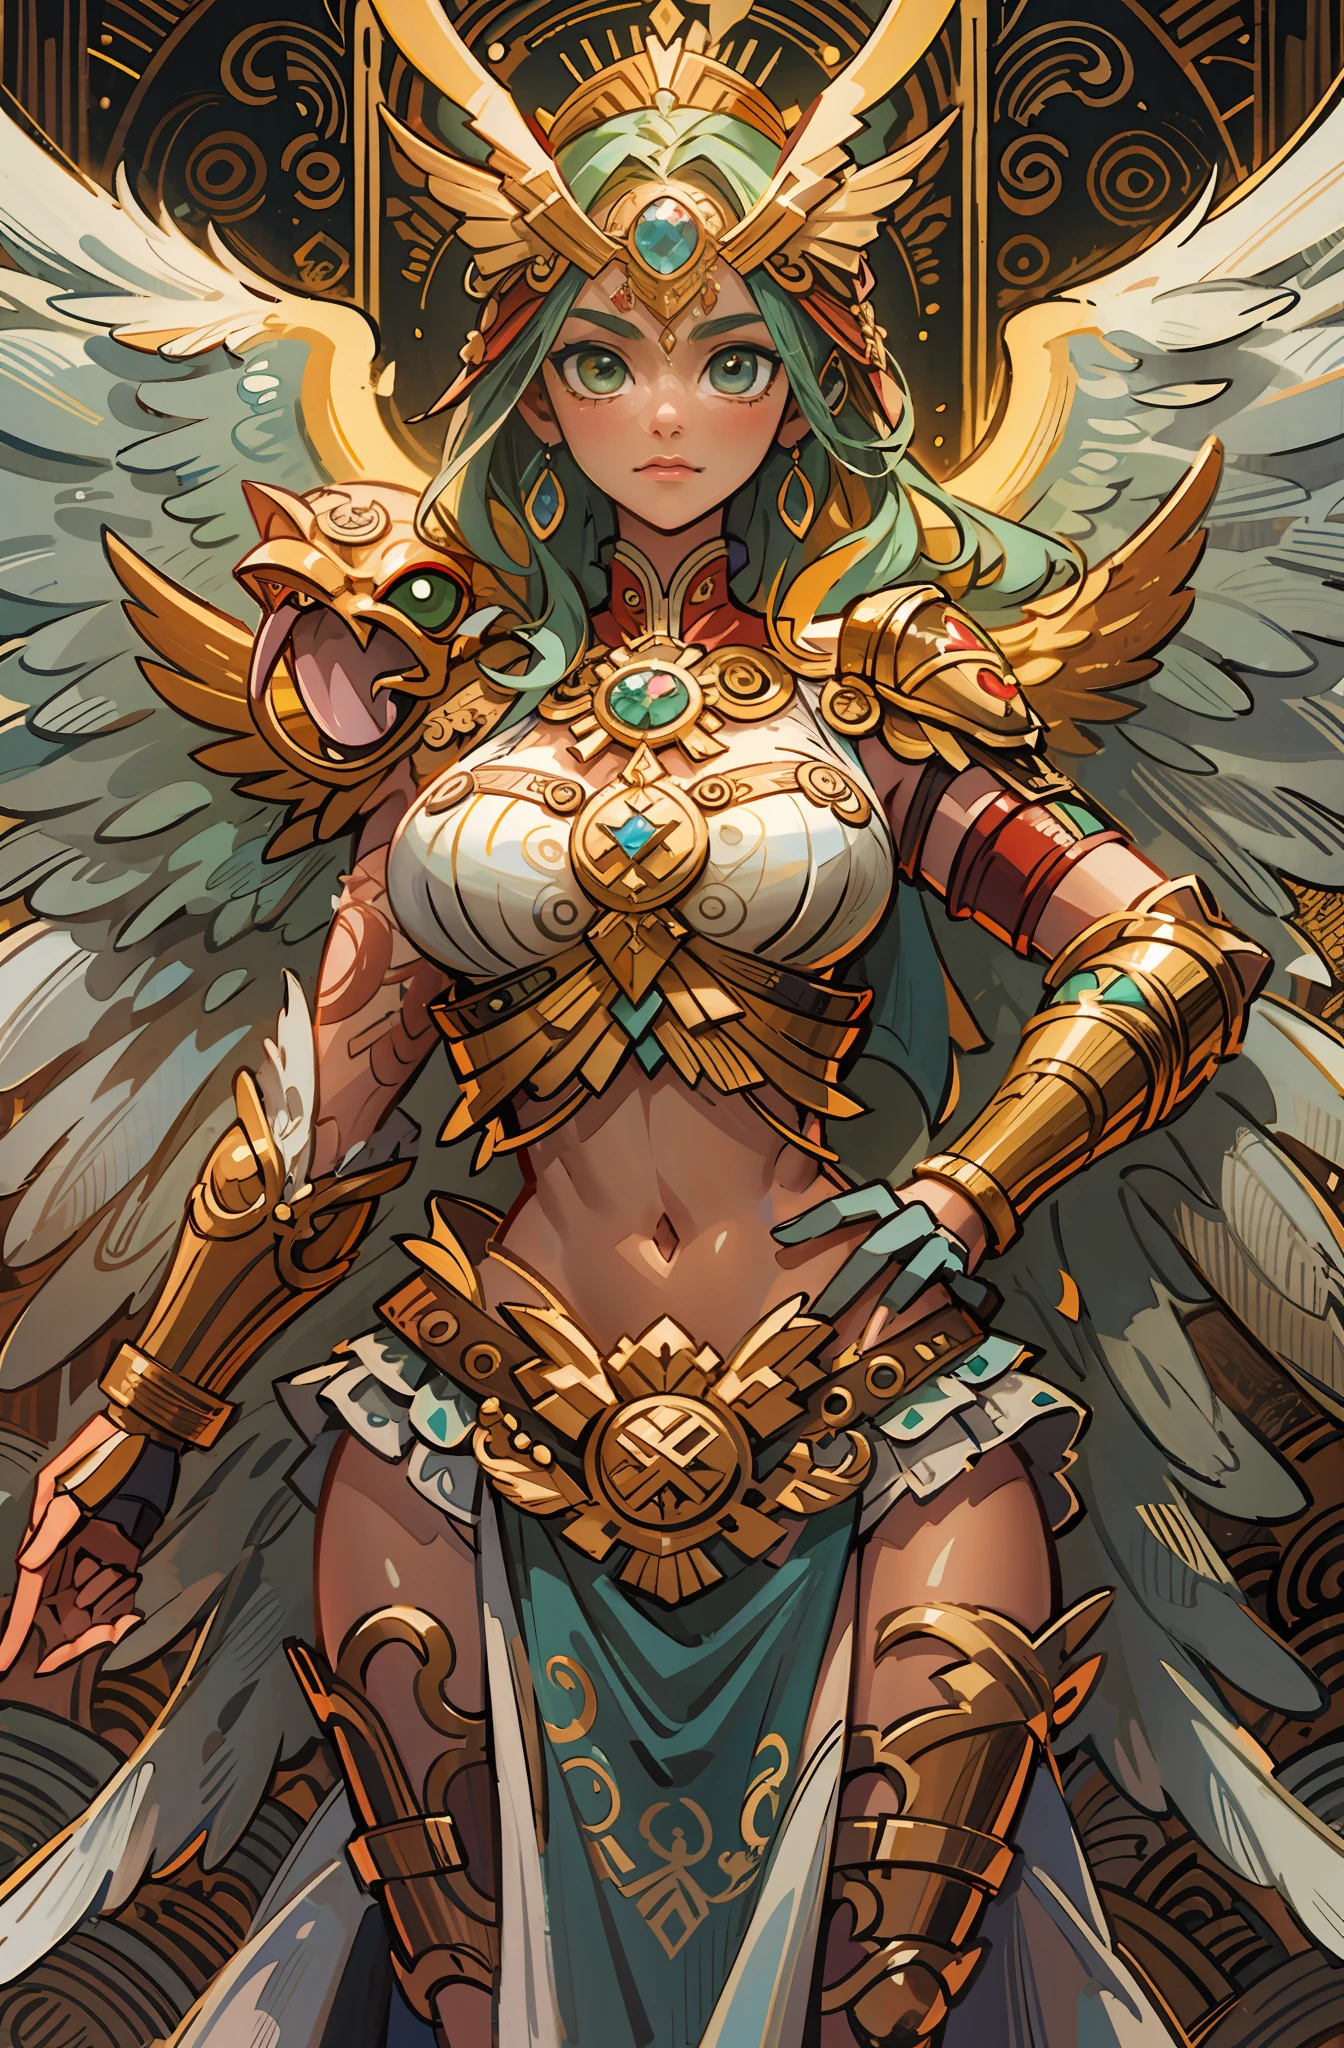 Masterpiece, best quality, {best quality}, {{masterpiece}}, {highres}, anime, attractive, exotic, Quetzalcoatl, Kukulkan, Serpent God, feathered serpent, flying feathers, plumage, Aztec, gold, gold, Anime - style illustration of a woman with wings and a golden halo, anime fantasy illustration, mystical atlantean valkyrie, as a mystical valkyrie, mystical valkyrie, detailed 2D digital fantasy art, anime fantasy art, avian warrior, highly detailed official art, epic fantasy digital art style, mechanized valkyrie girl, goddess. Extremely high detail,18+ face, nsfw art, body curve, full sexy body, random position, random pose position, random position, beauty shirt, ((upper body)), ((closed up)), ((detail face)),